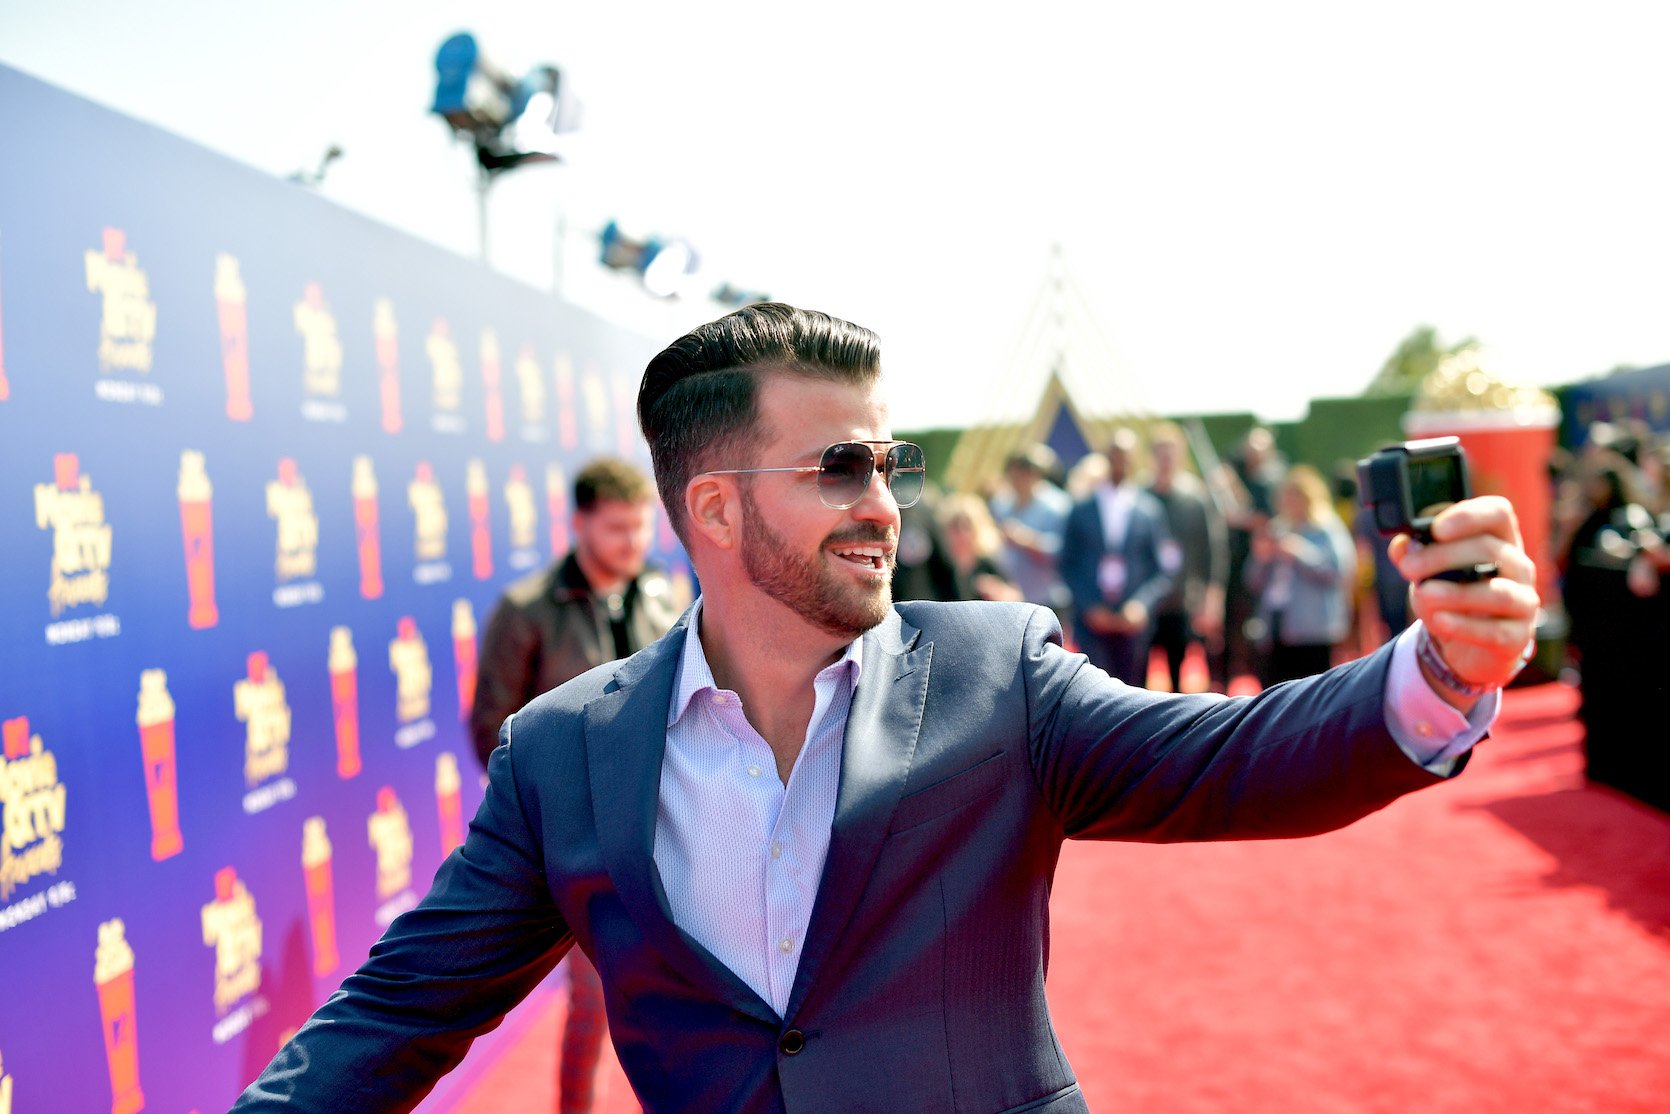 Johnny 'Bananas' Devenanzio from 'The Challenge' Season 38 attends the 2019 MTV Movie and TV Awards